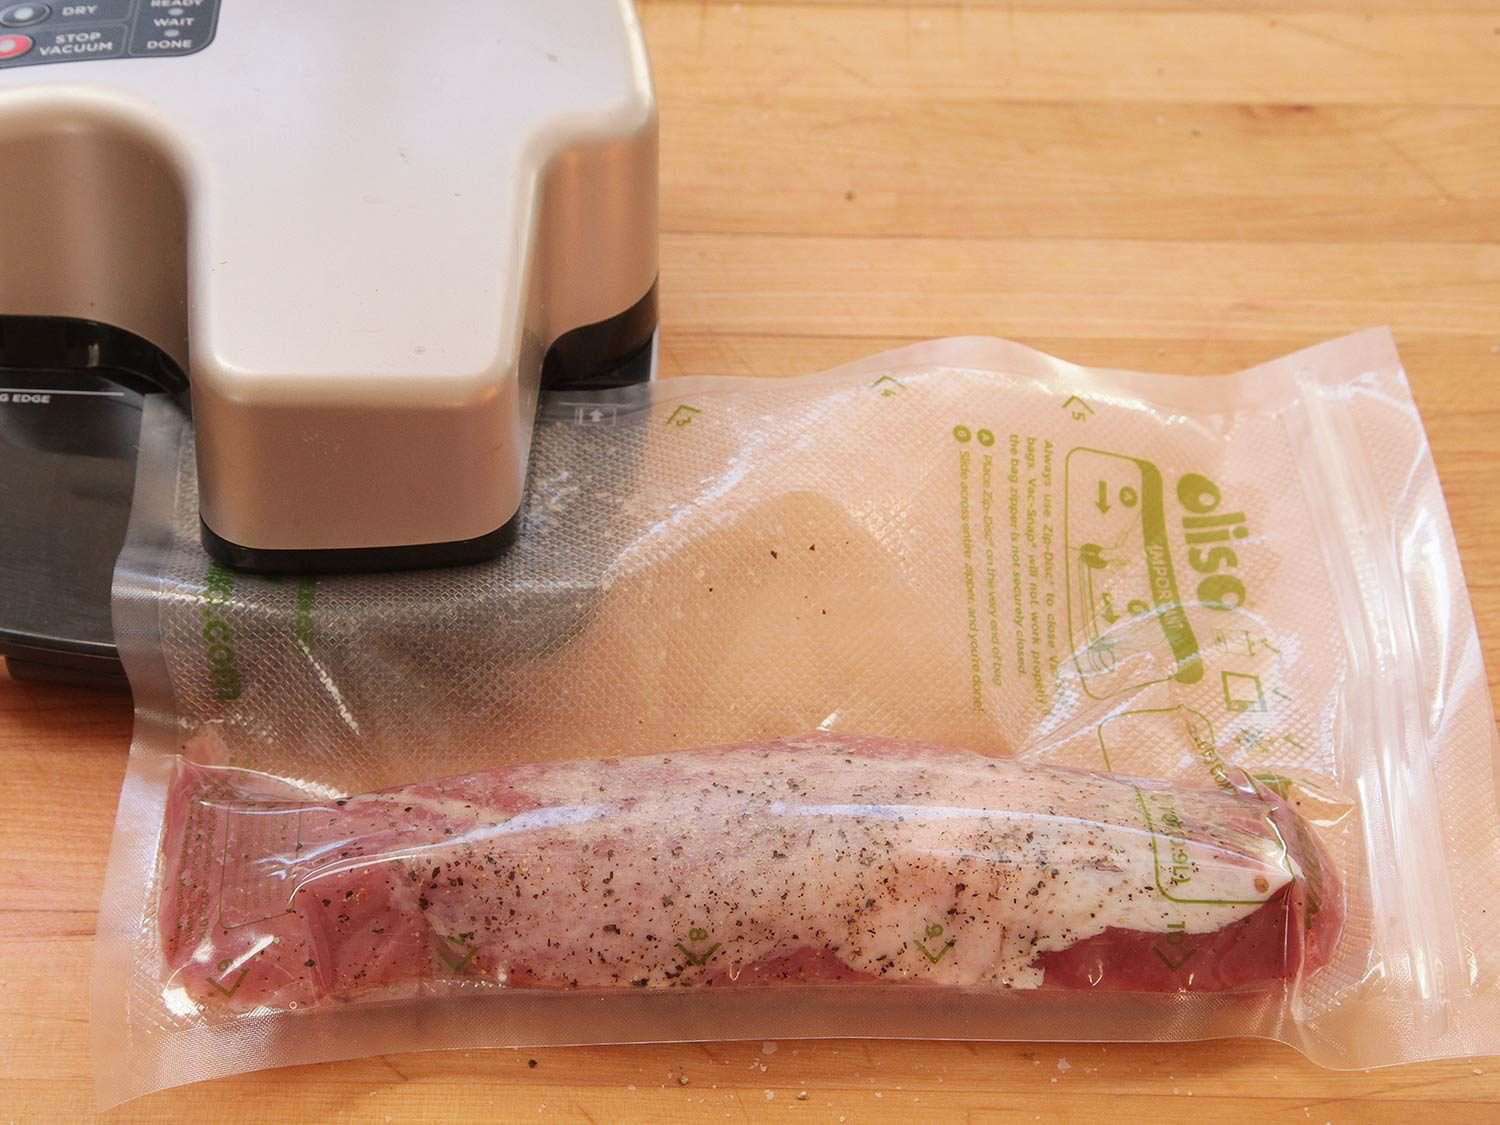 Sealing a sous vide bag with seasoned pork loin in it before cooking sous vide.